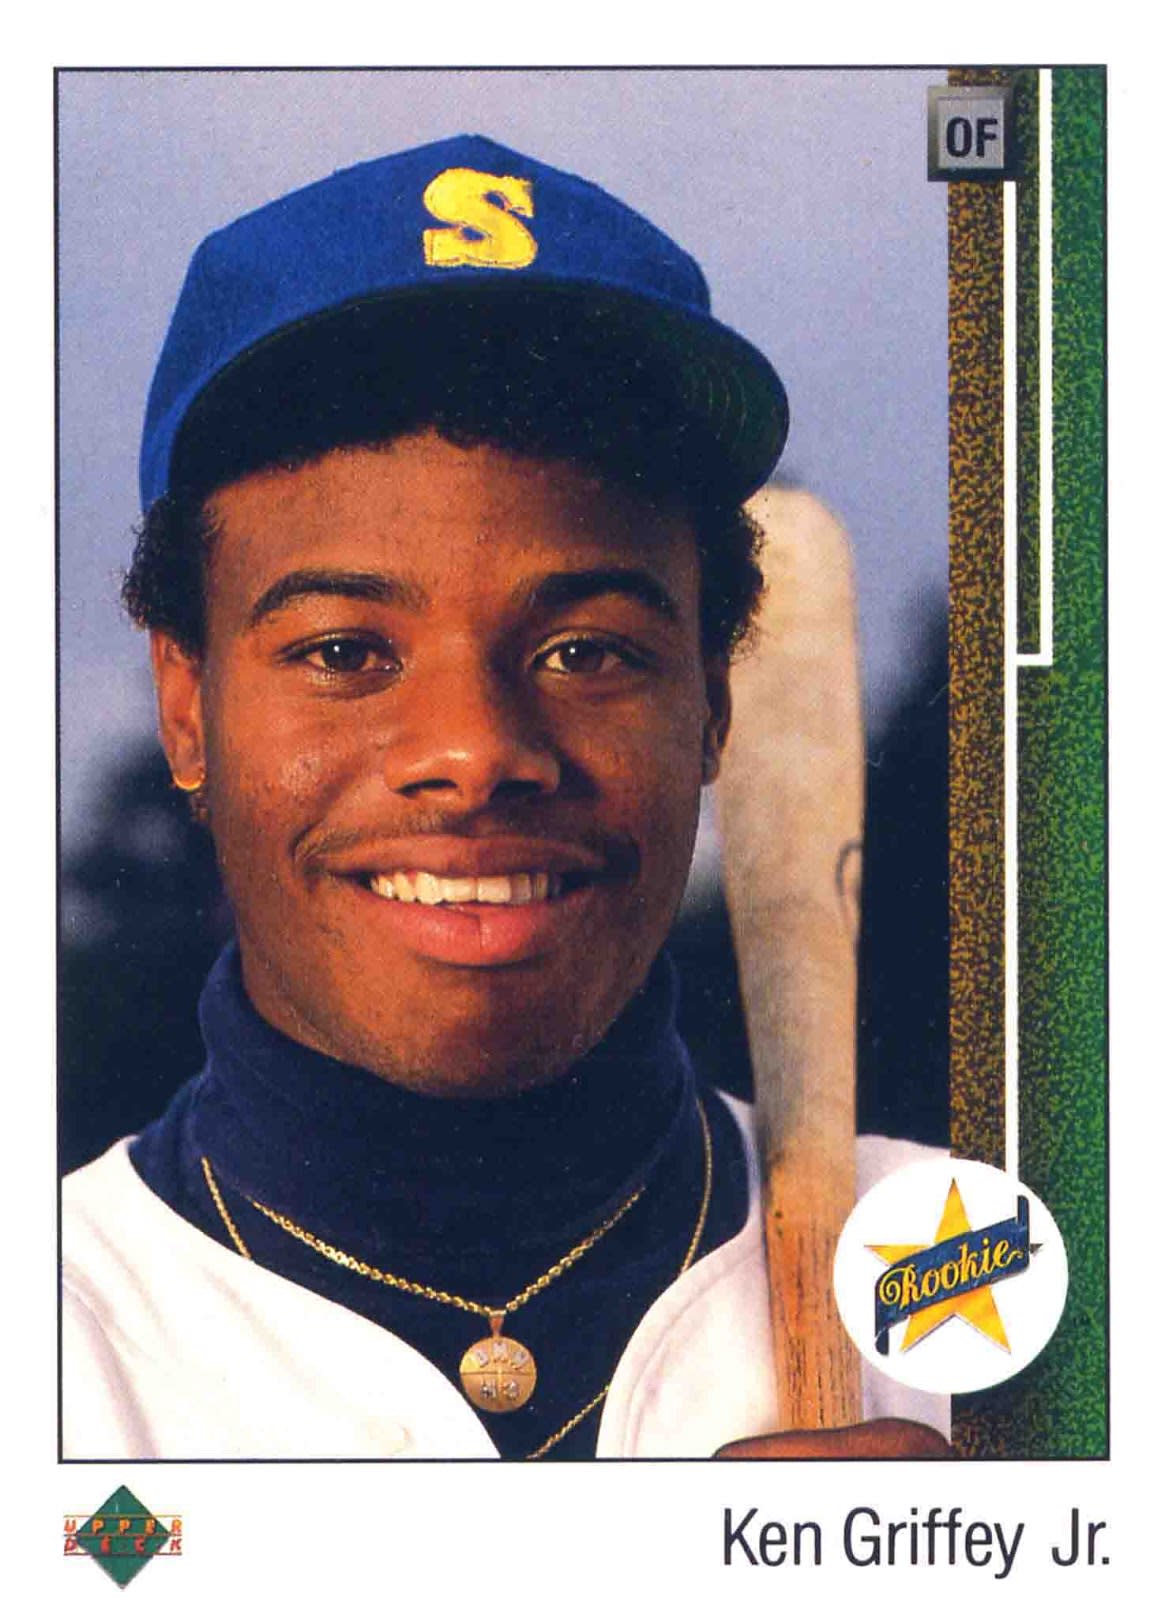 What the iconic 1989 Ken Griffey Jr. Upper Deck card means to a generation  of fans